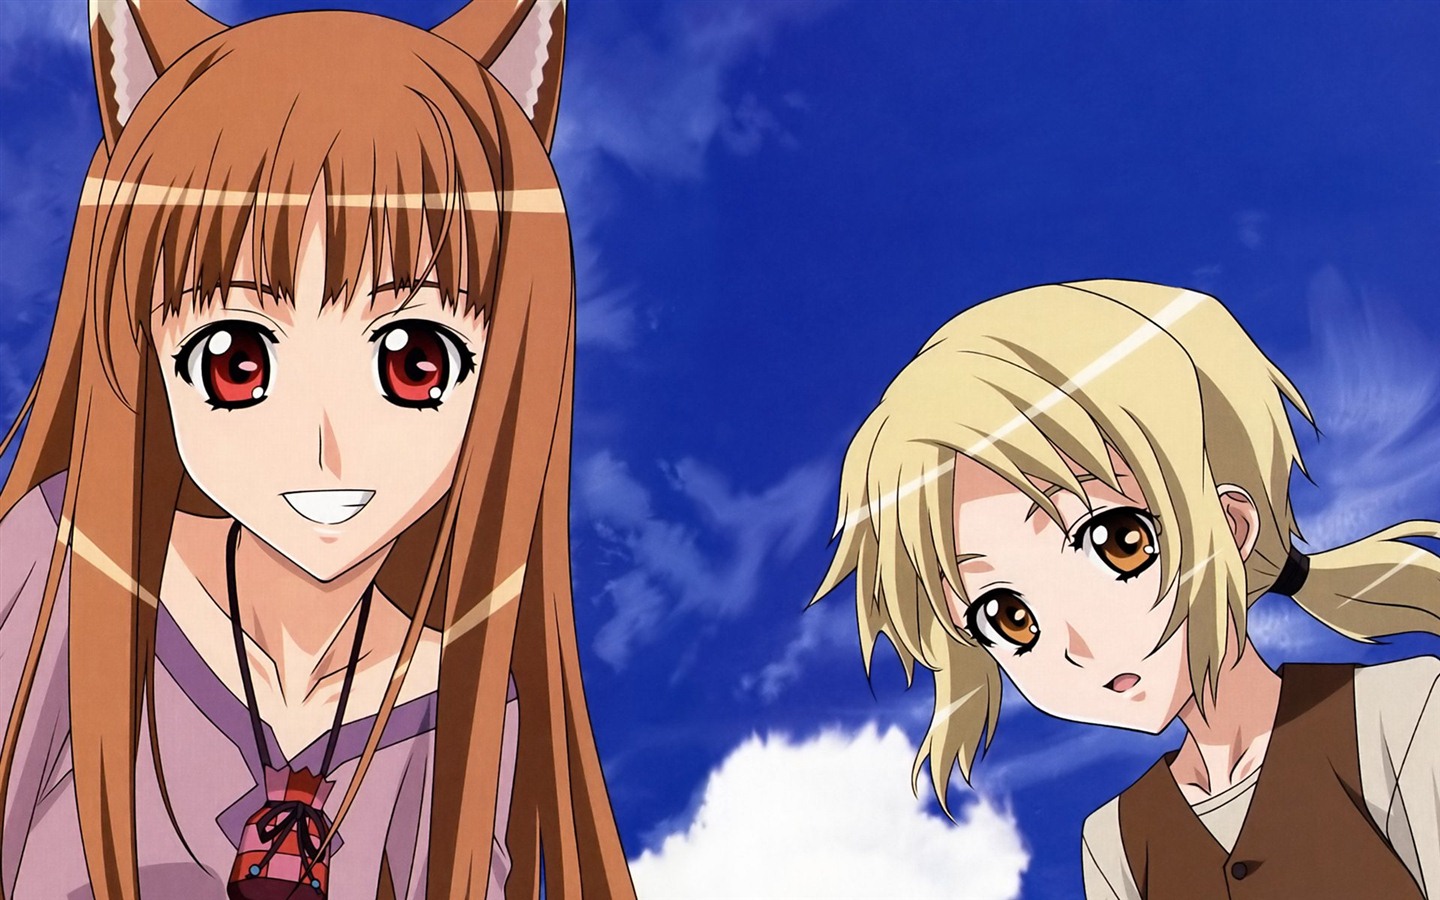 Spice and Wolf HD Wallpaper #25 - 1440x900